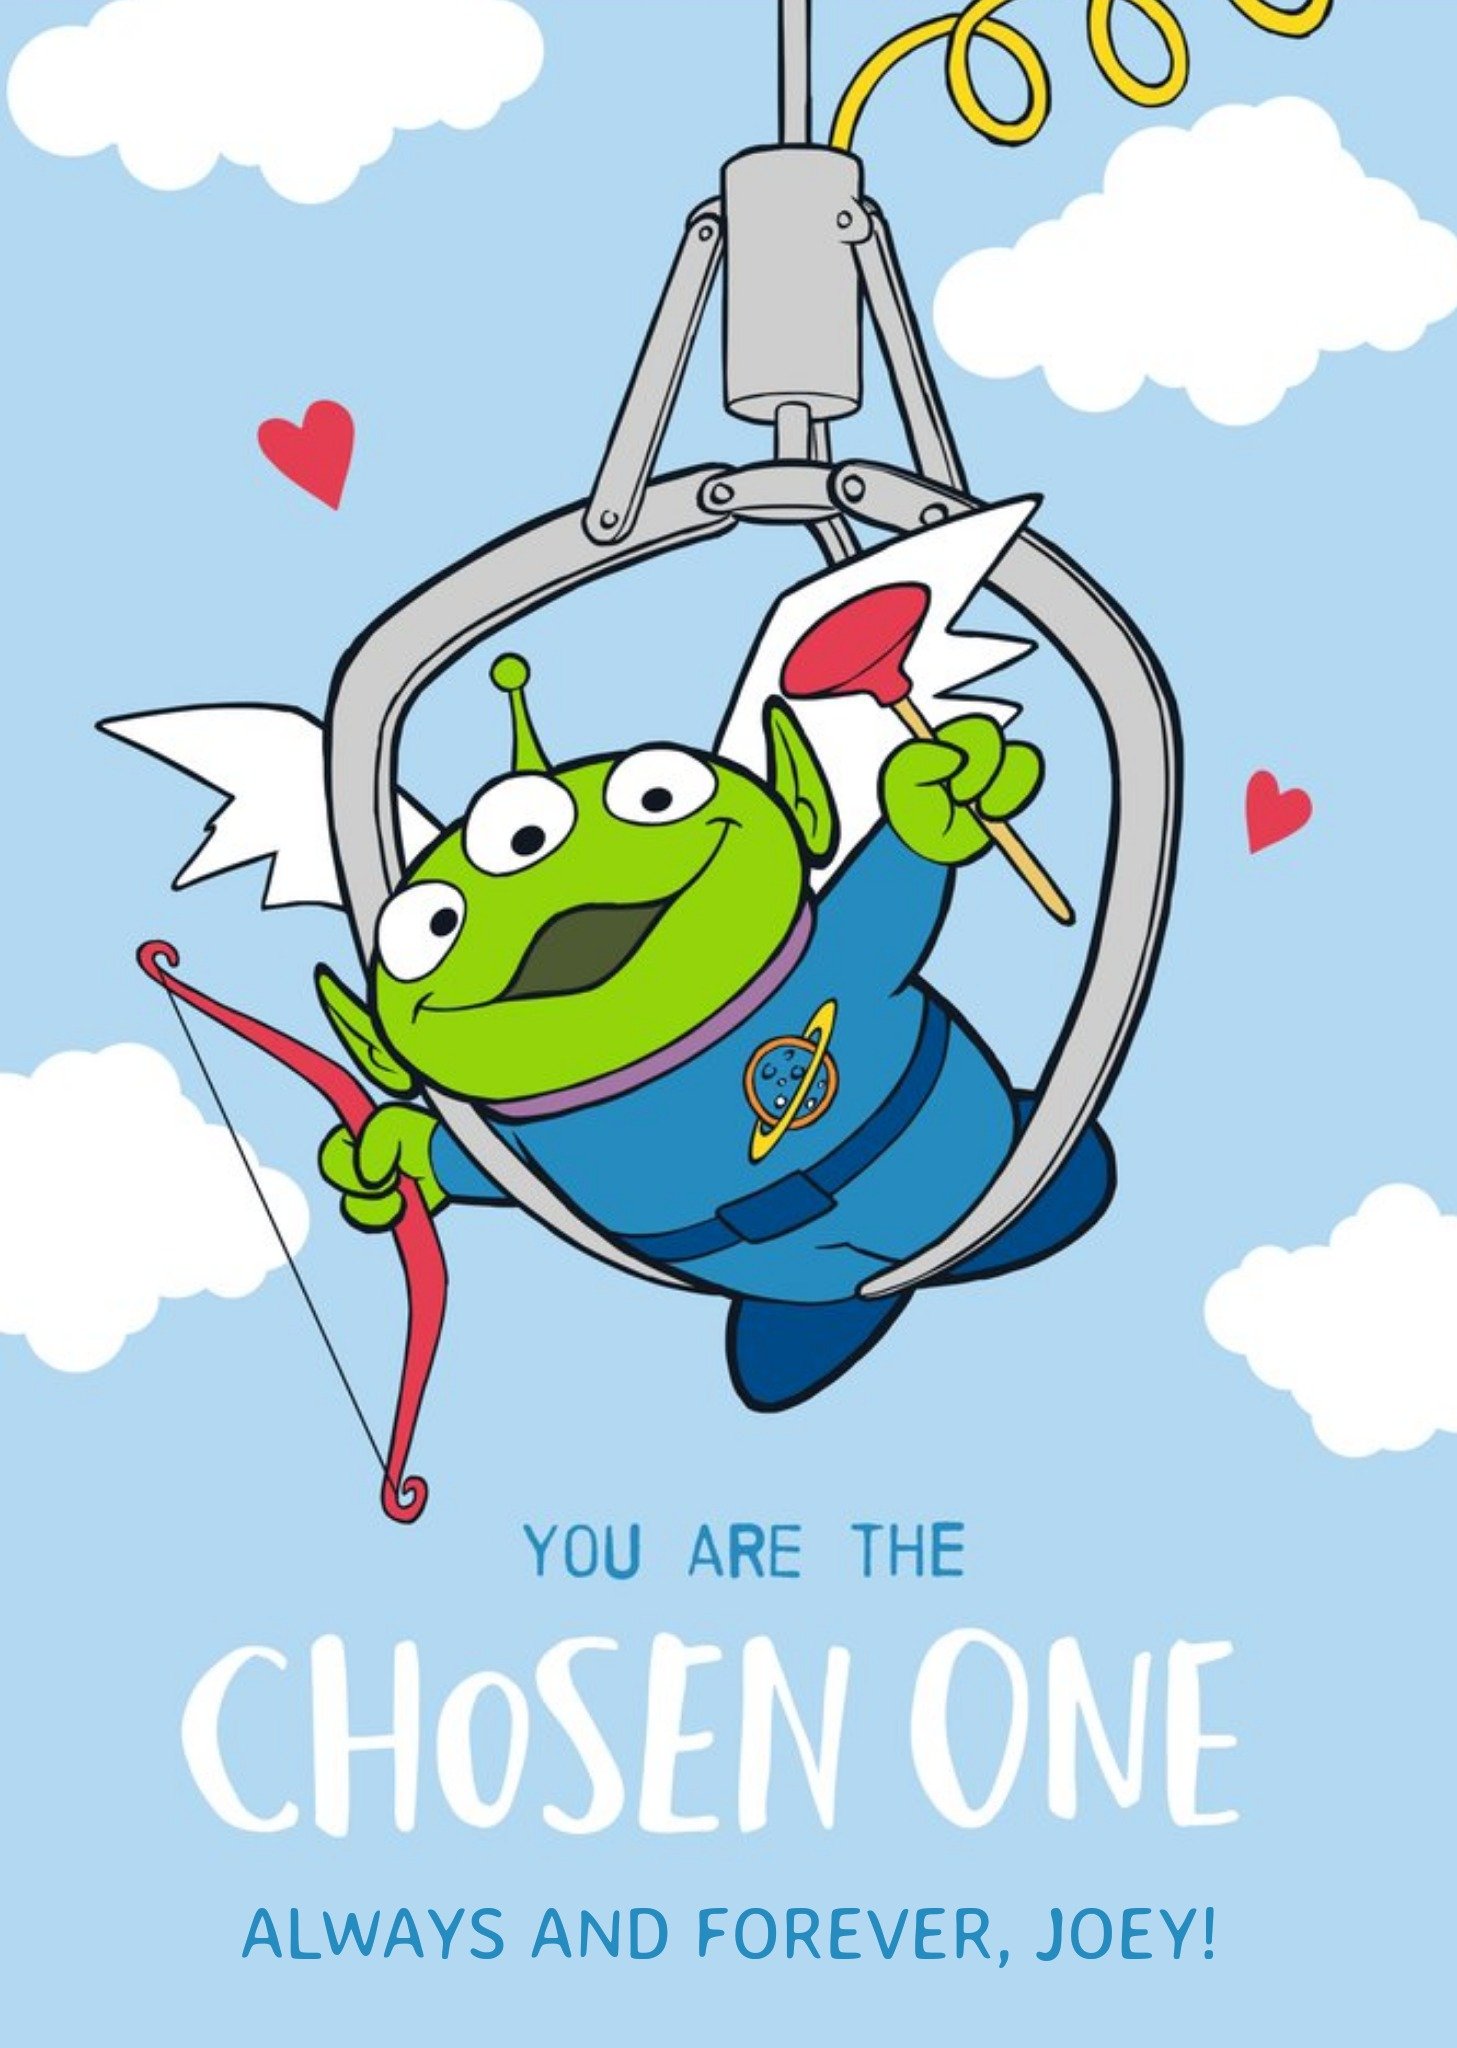 Toy Story Alien Character You Are The Chosen One Anniversary Card Ecard